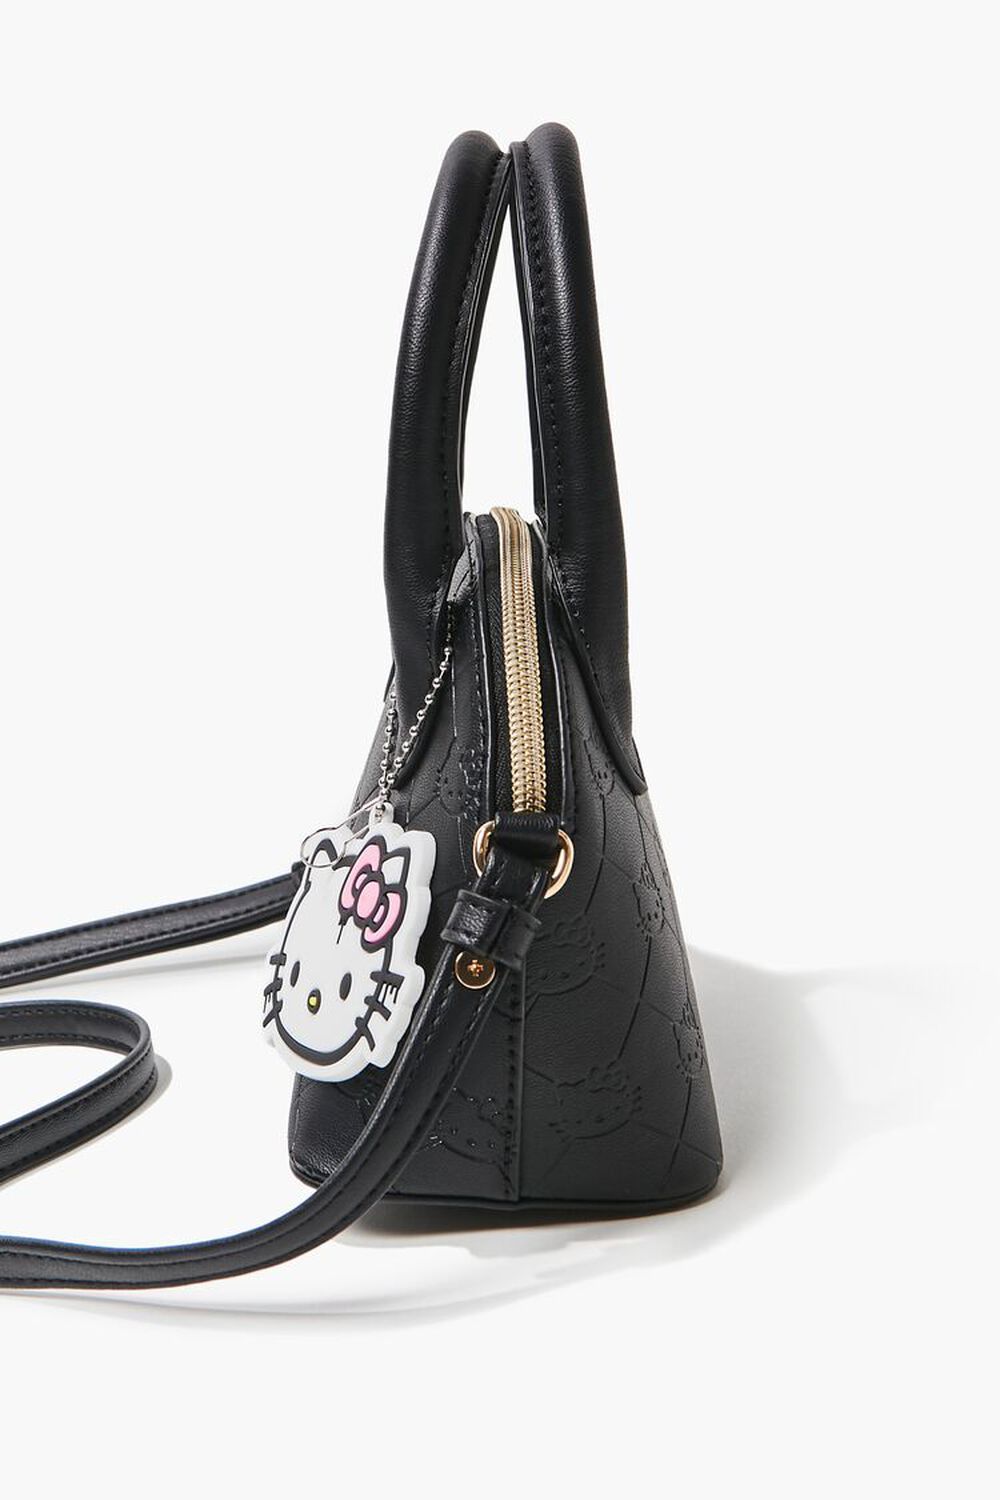 Hello kitty and Louis Vuitton! Best combination ever!  Hello kitty purse, Hello  kitty bag, Hello kitty party